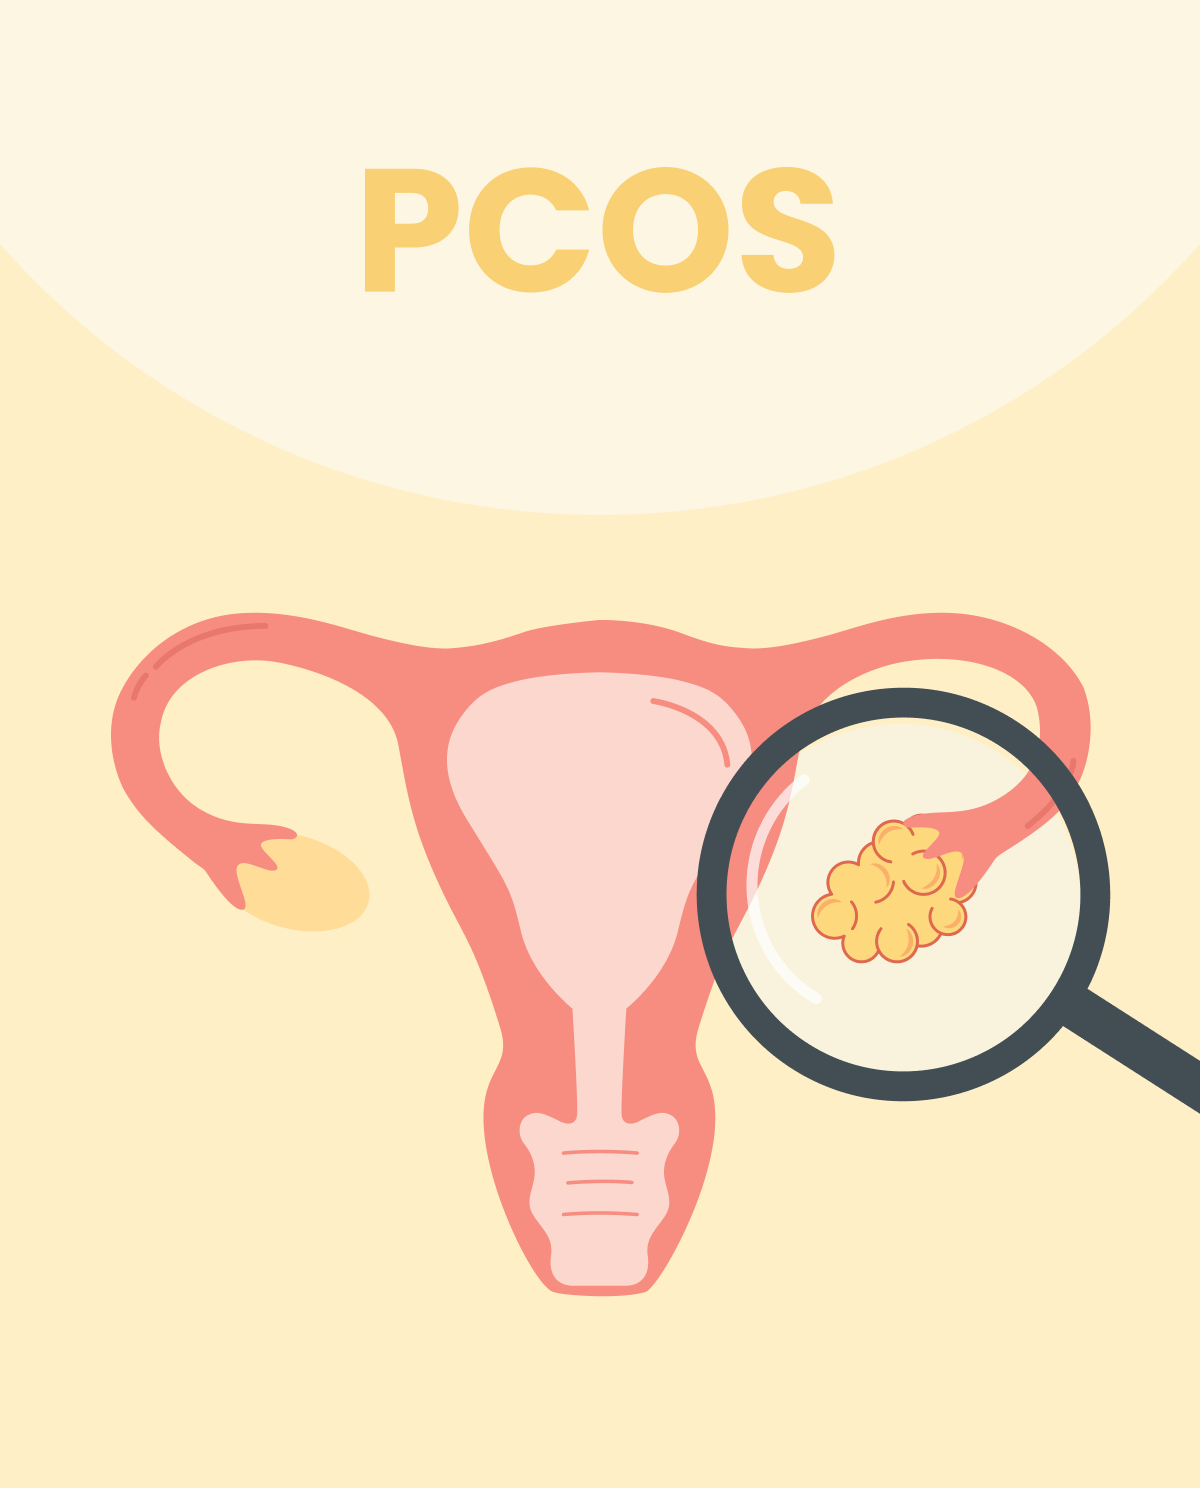 Overview of polycystic ovarian syndrome